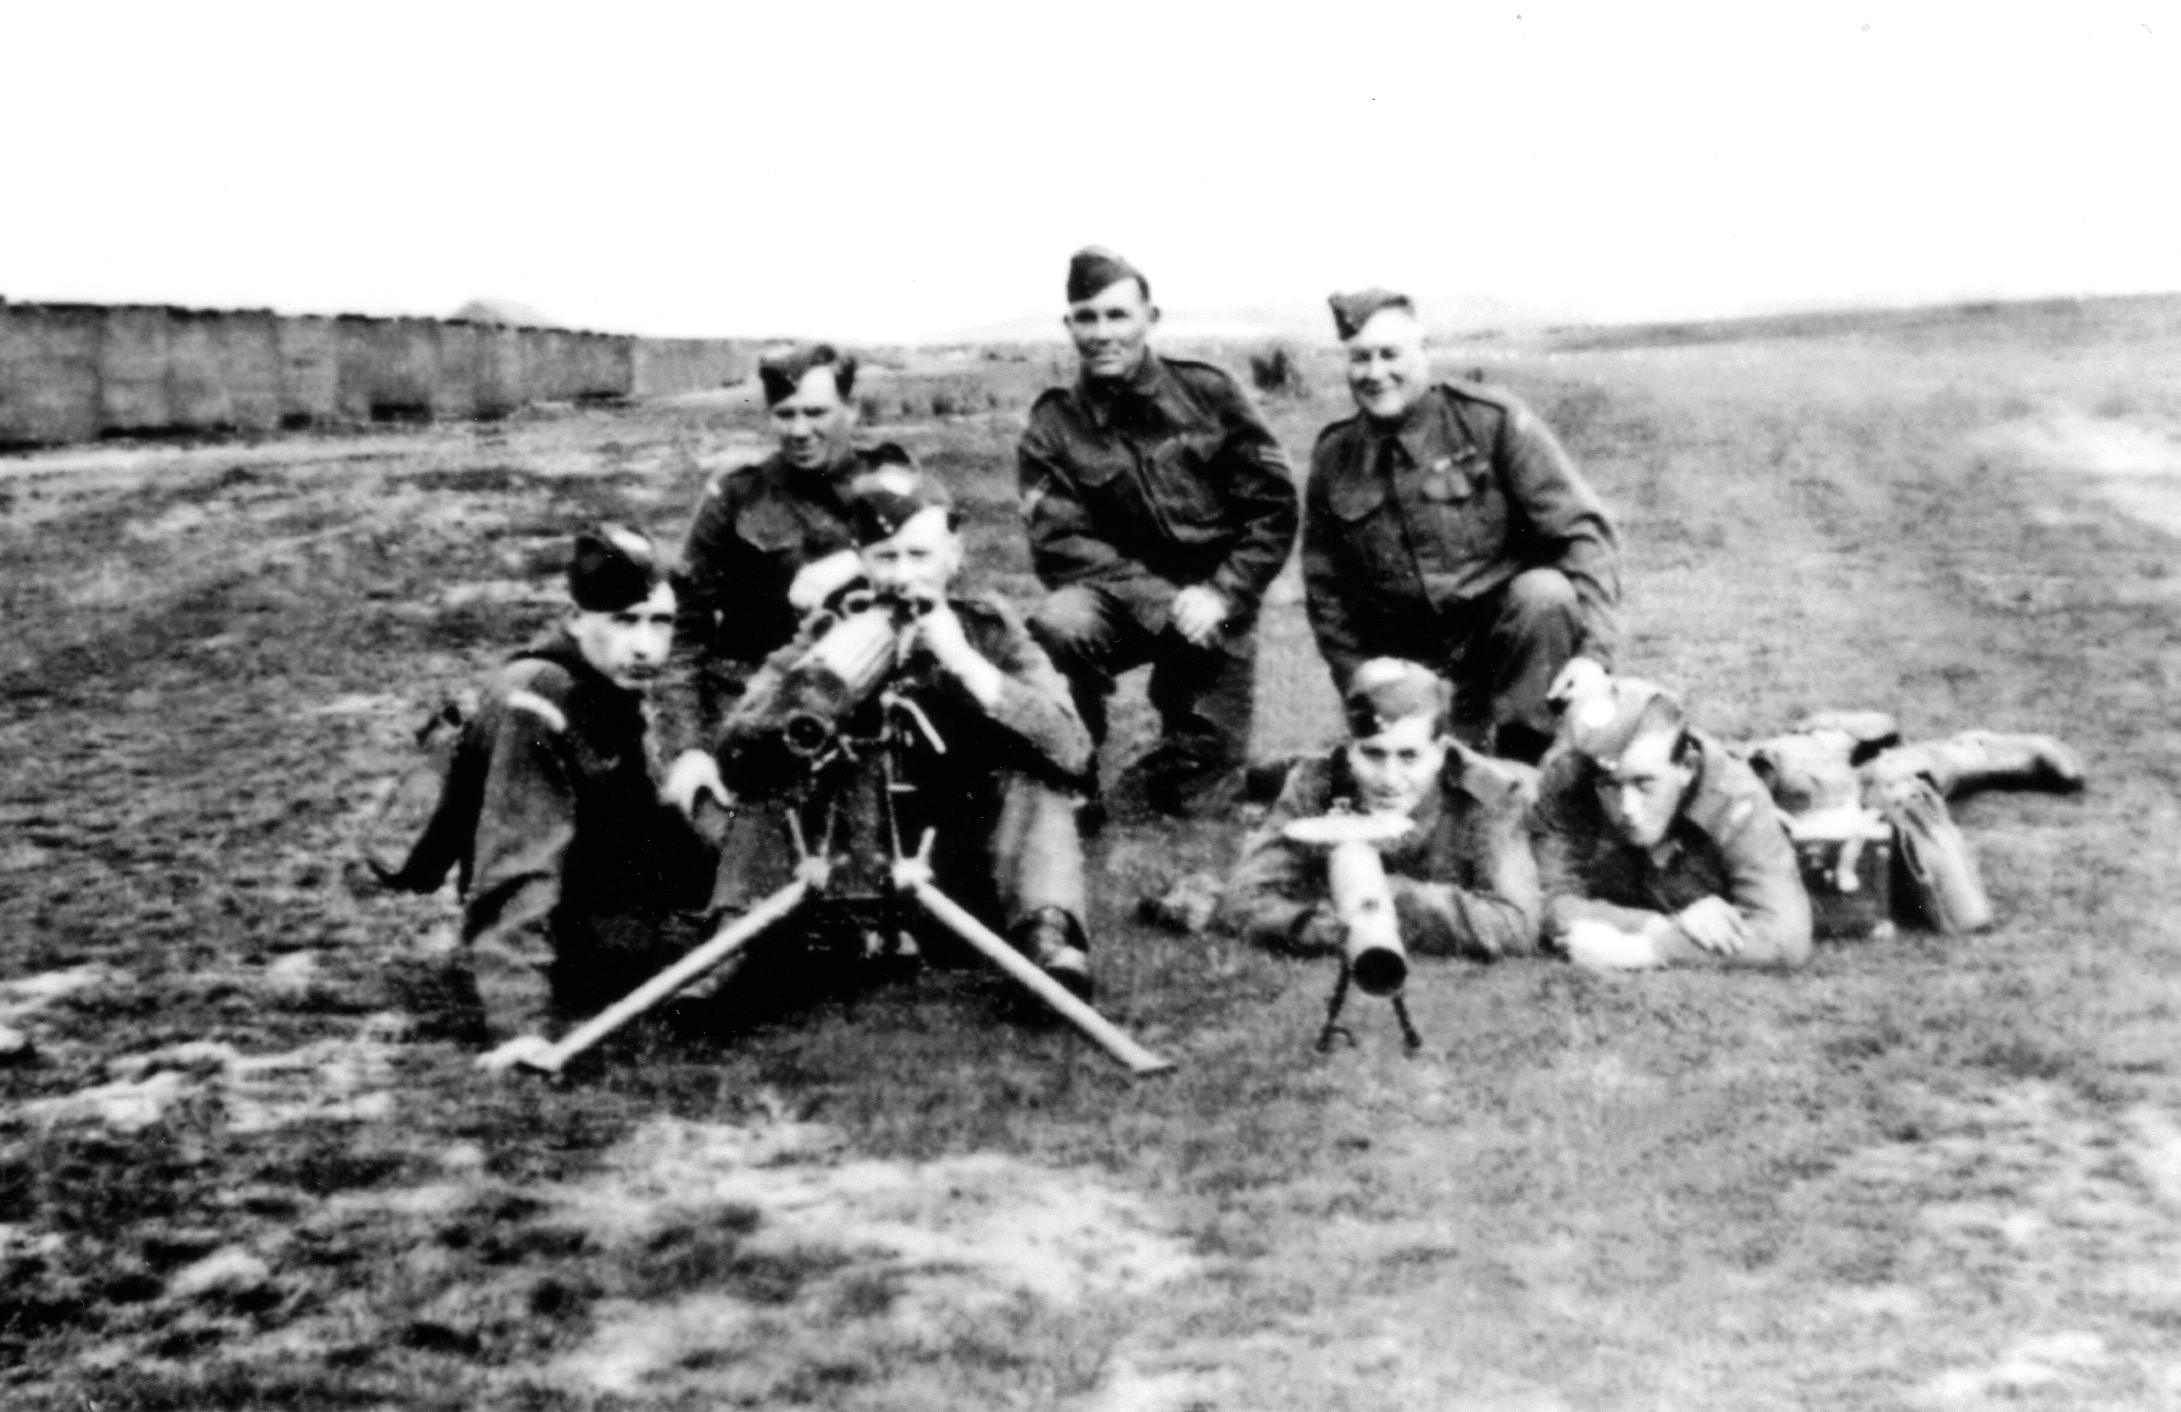 Home Guard Stenton with Vickers and Lewis machine guns.jpg